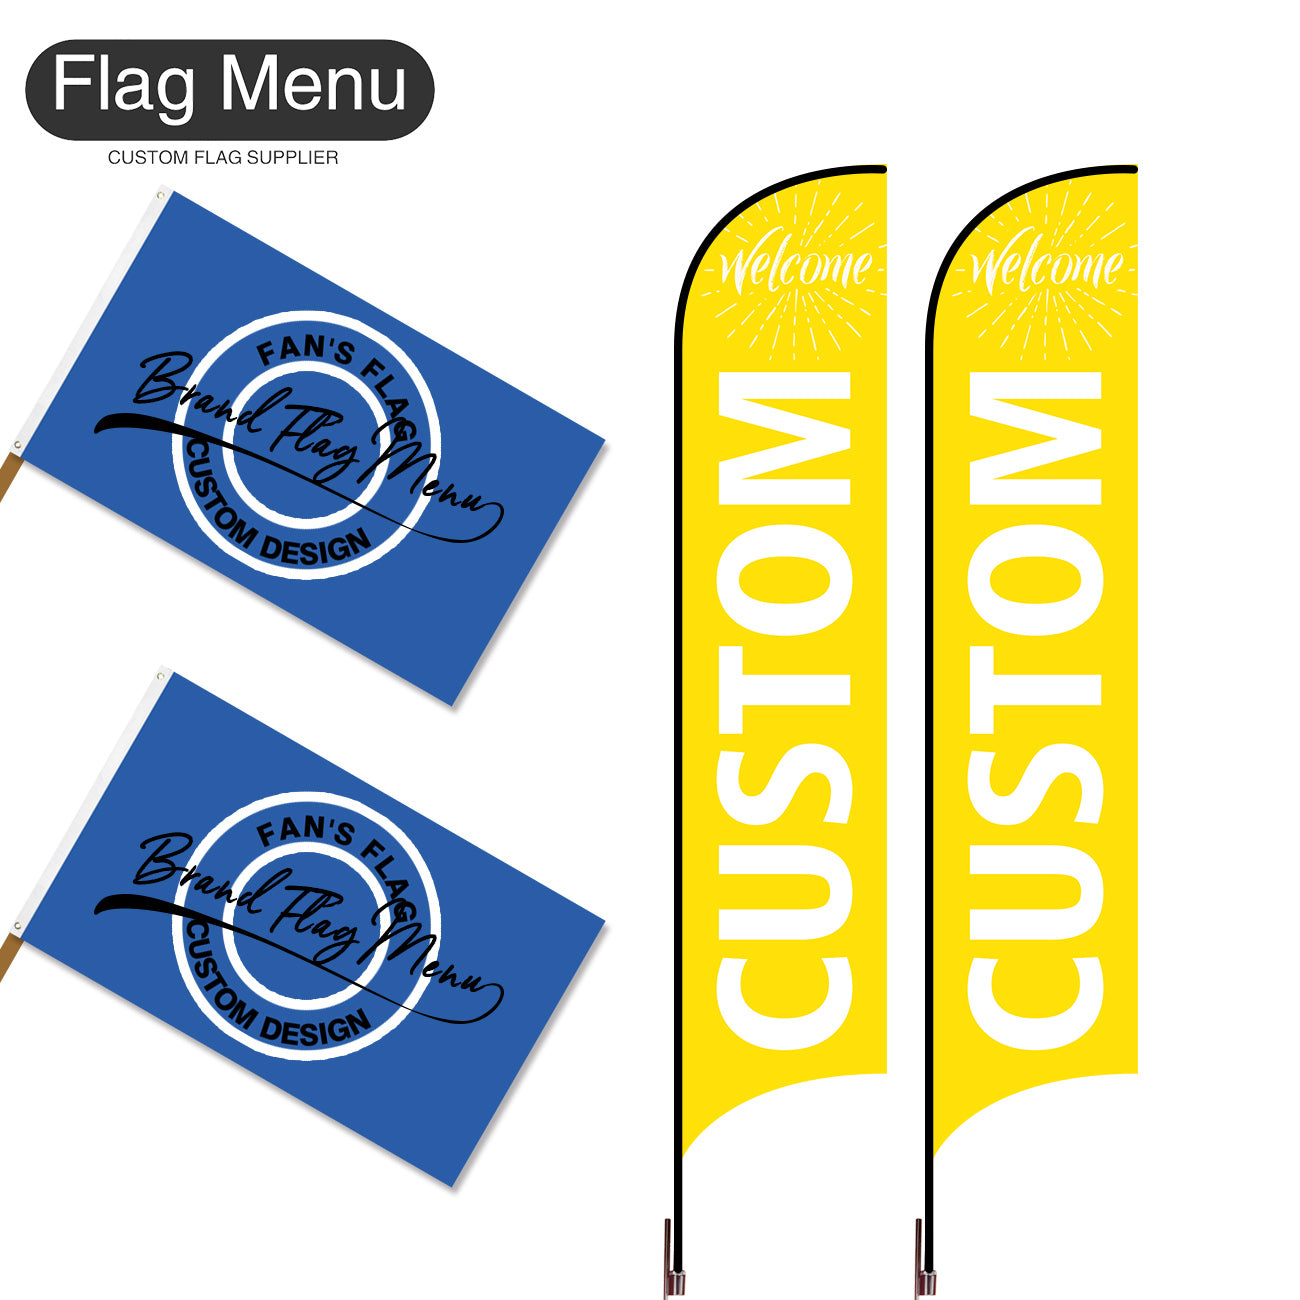 Outdoor Advertising Set - C-Yellow A-S - Feather Flag -Double Sided & 3'x5' Regular Flag -Single Sided-Cross & Water Bag-Flag Menu